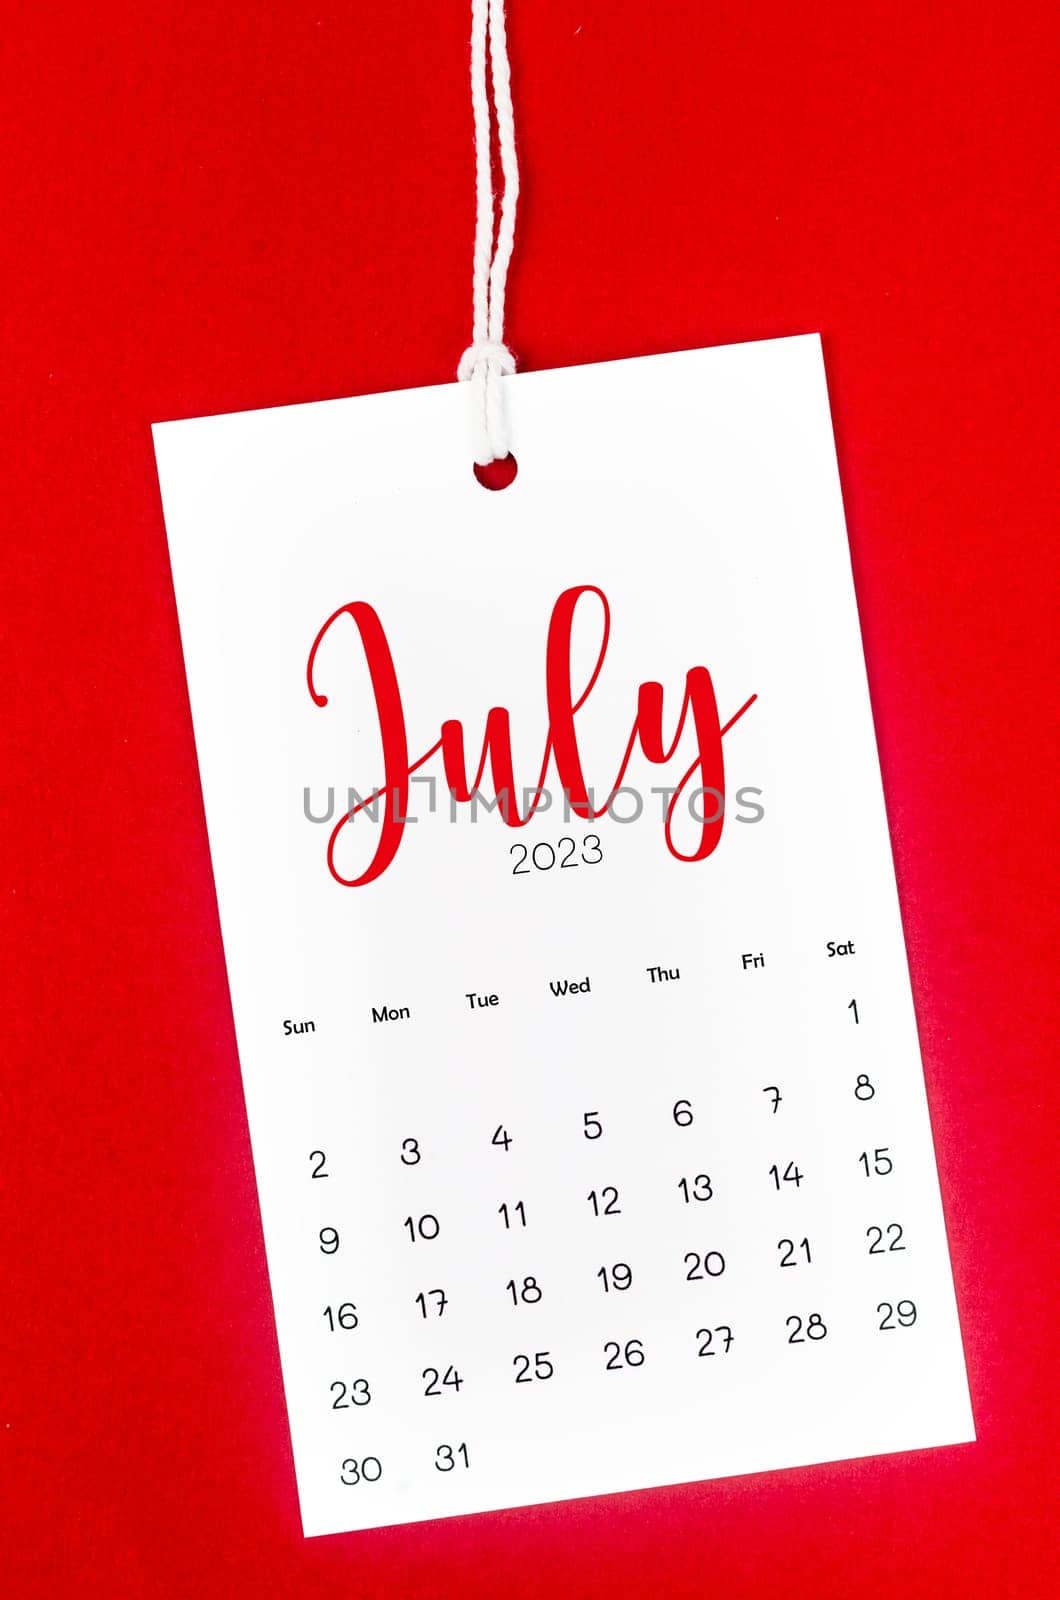 The July 2023 calendar page for 2023 year hanged on white rope on Red background. by Gamjai